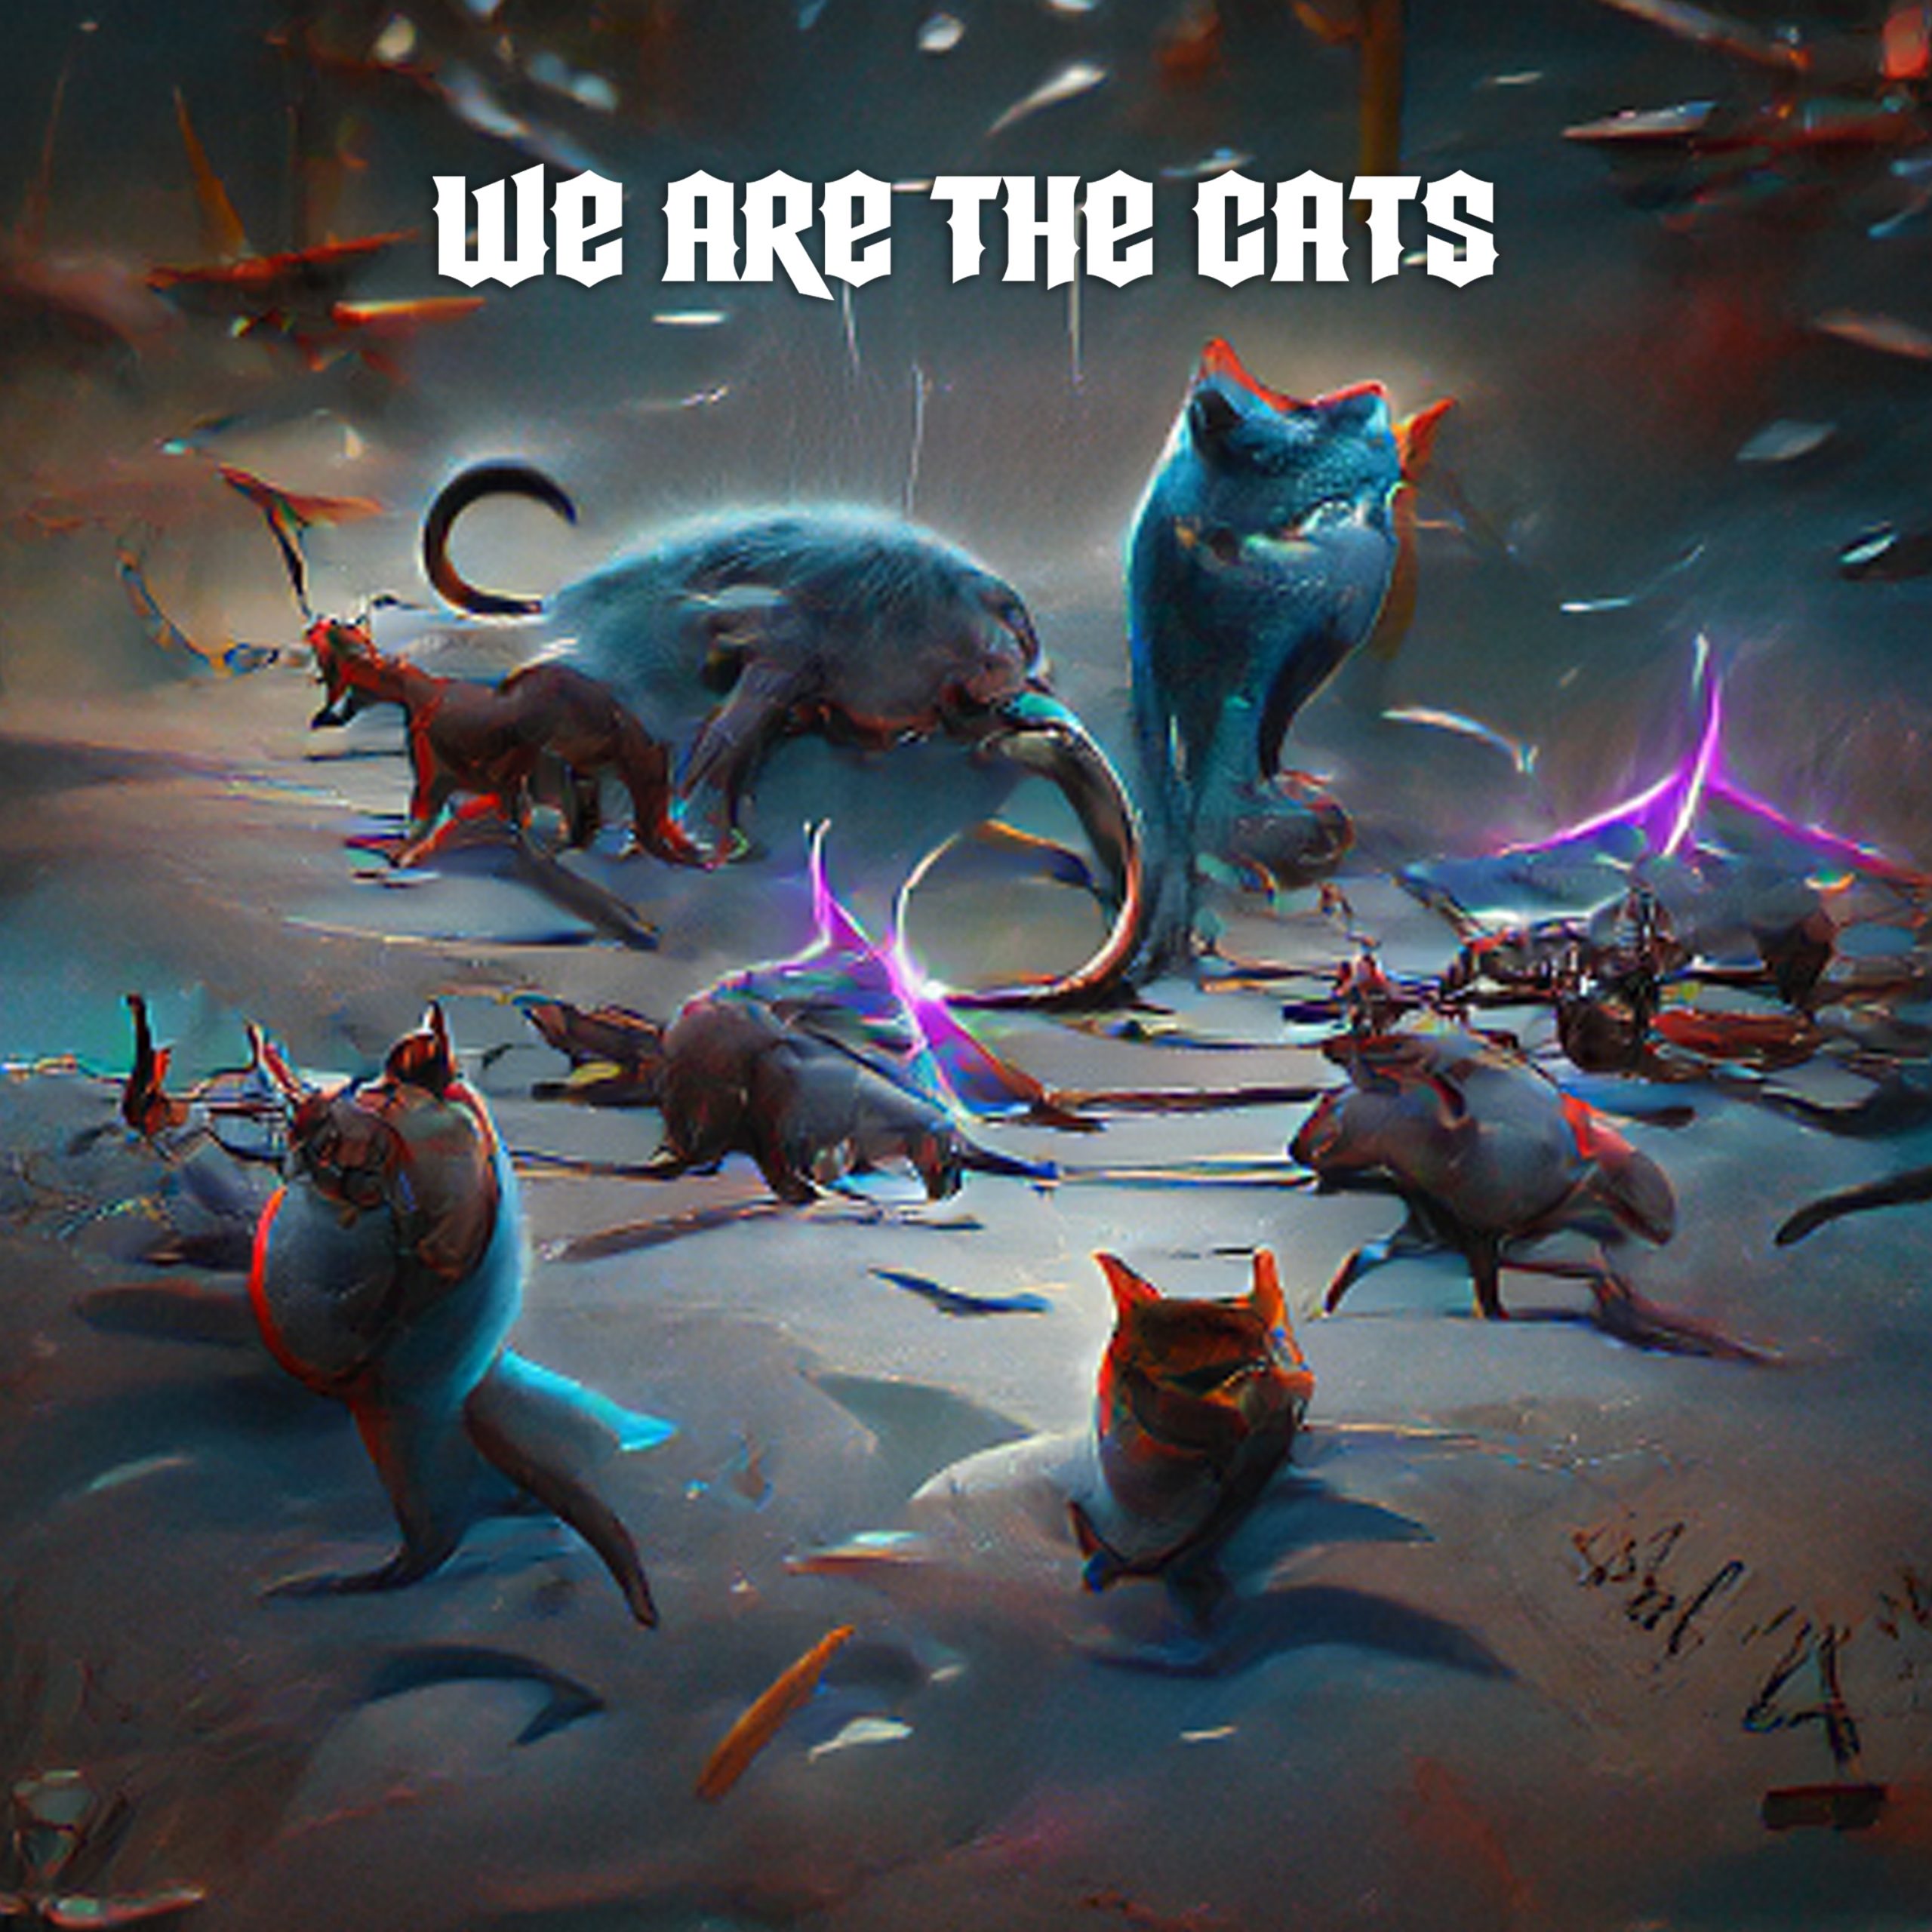 We Are the Cats – Sabih Cangil